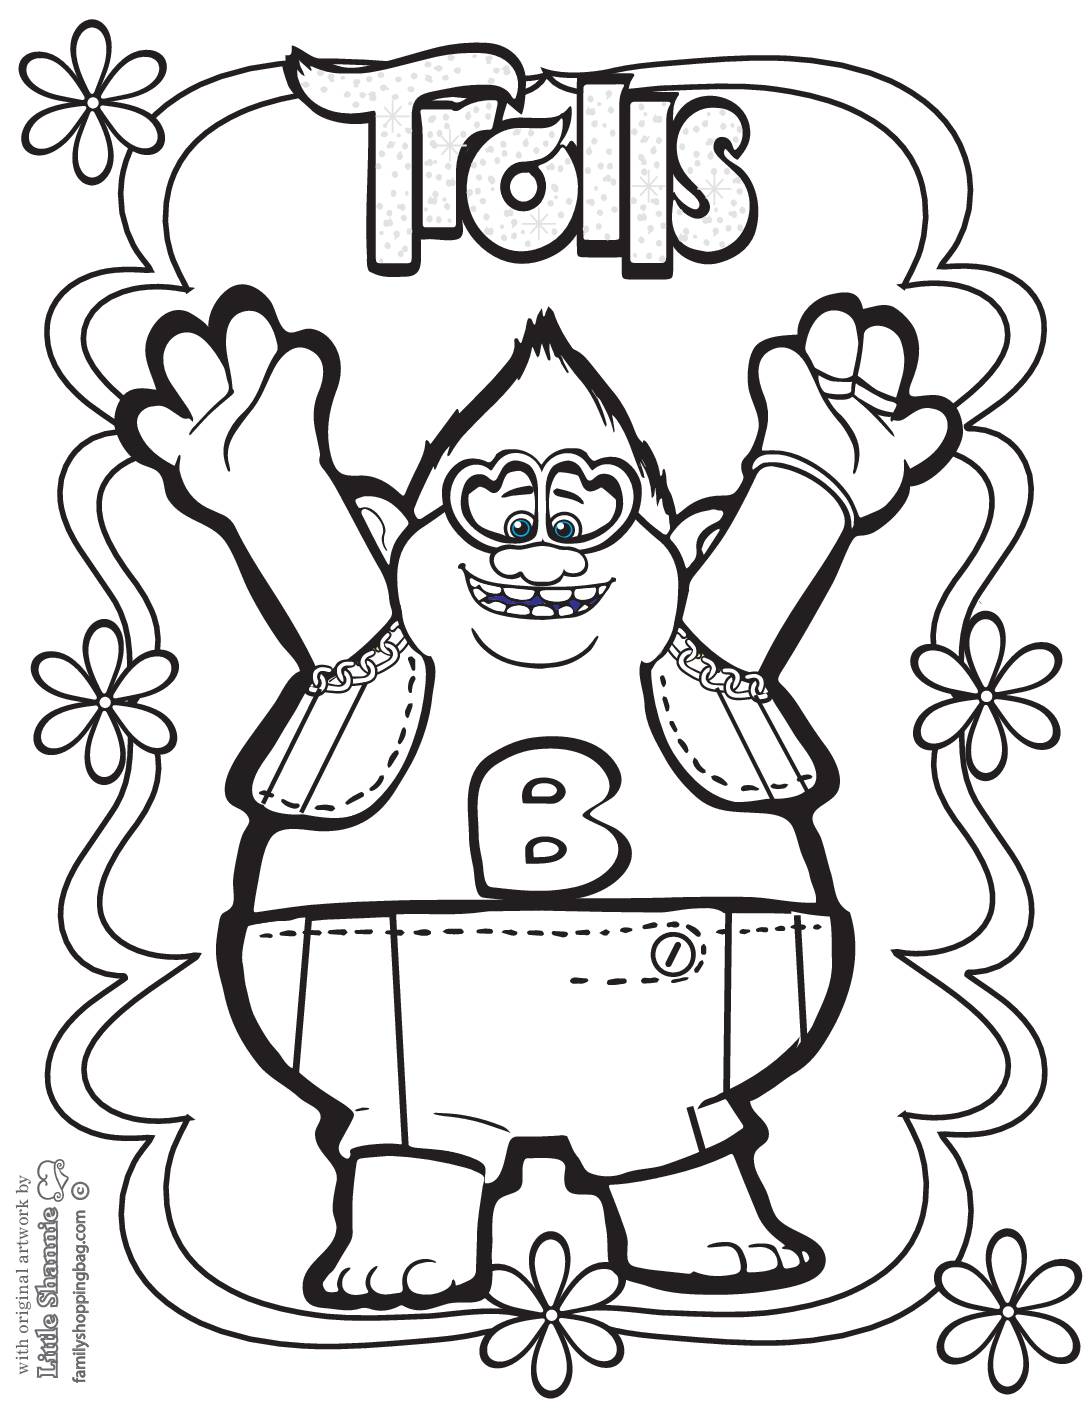 Coloring Page Trolls Coloring Pages